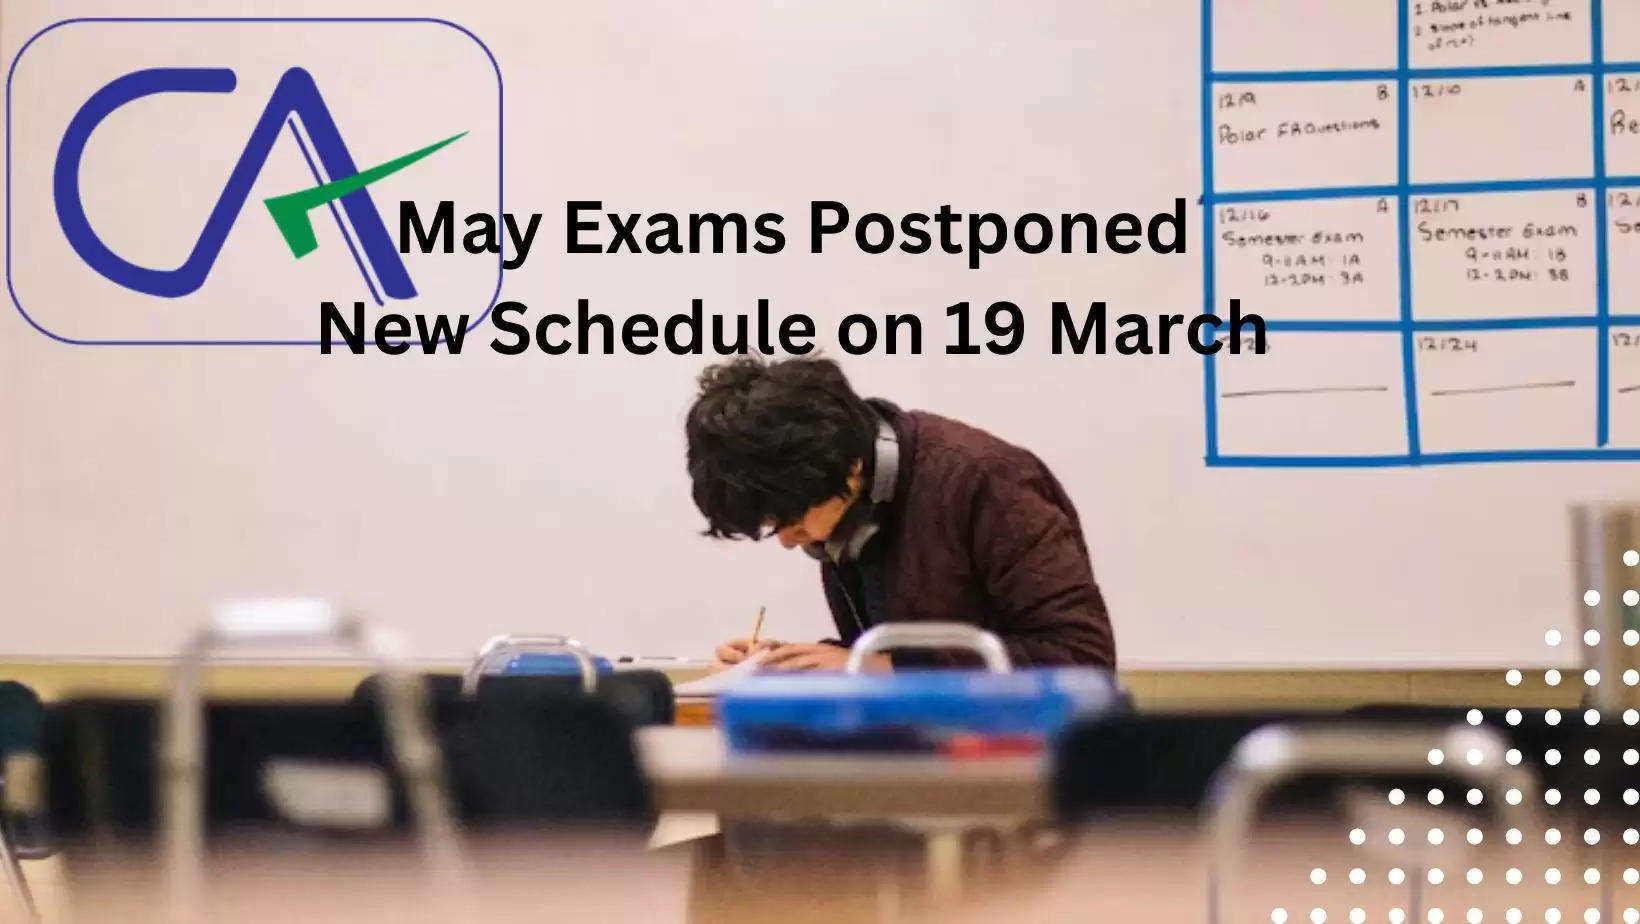 CA Exams Postponed: ICAI to declare revised exam schedule on 19 March